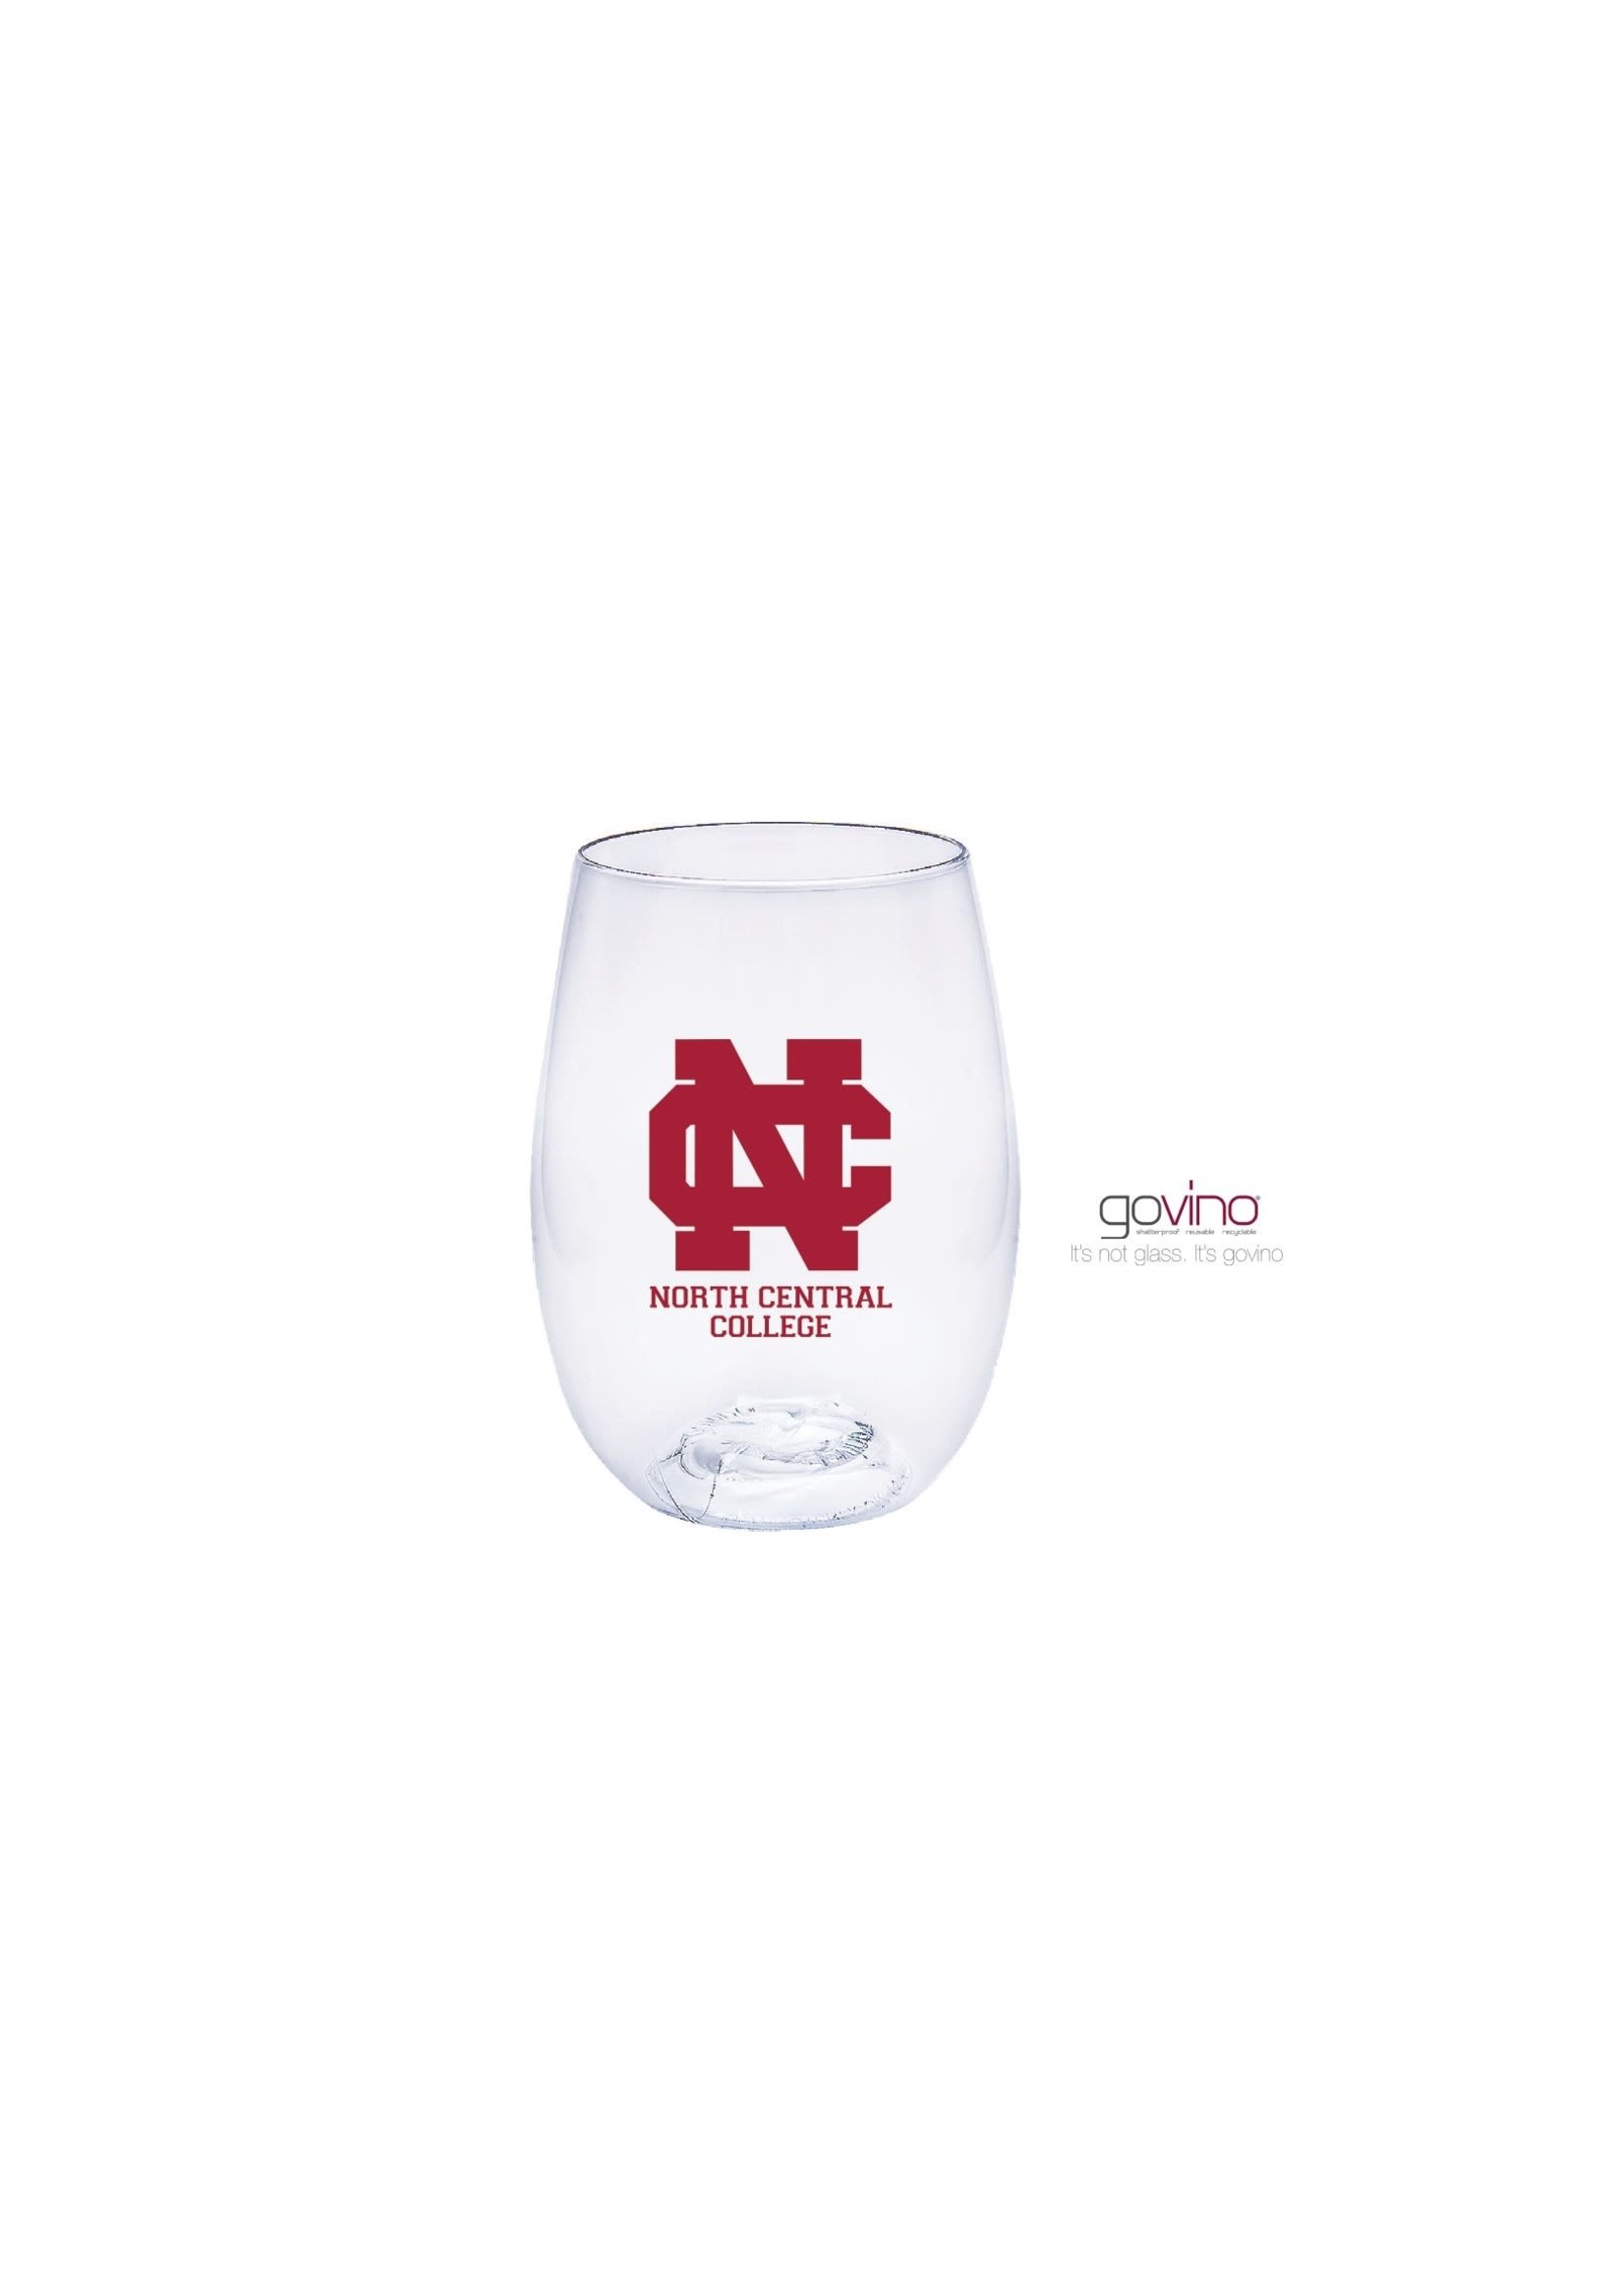 Neil Enterprises North Central College Govino unbreakable Wine Glass by Neil